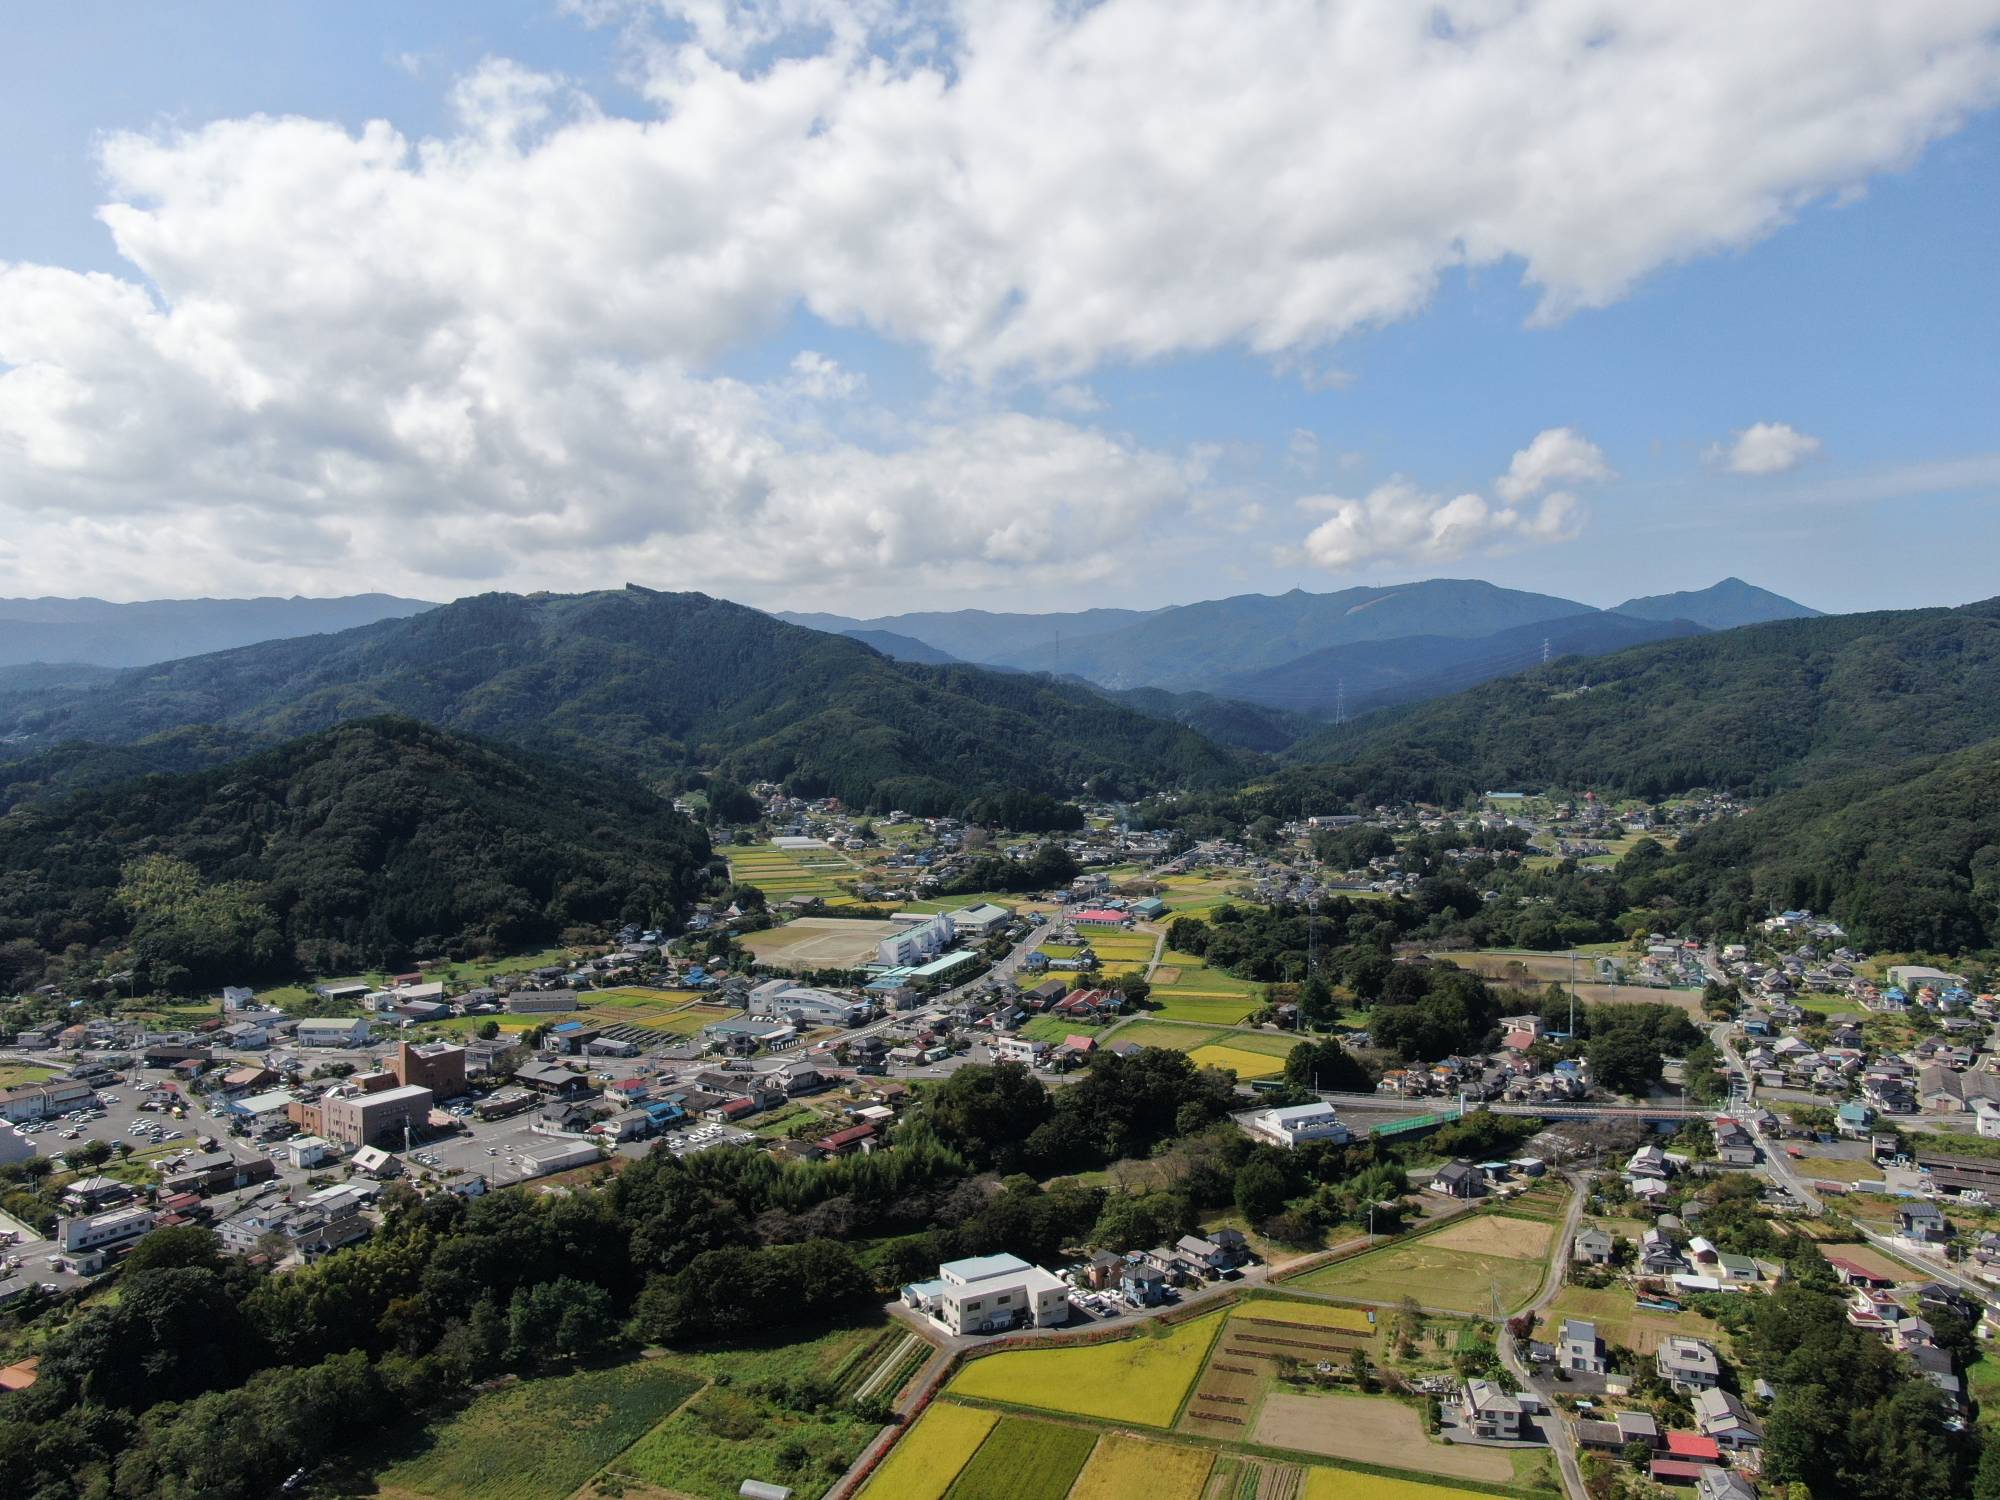 Nestled along its namesake river and set against lush forests and mountains, the town of Tokigawa, located around an hour and a half from Tokyo, is known for its long history of woodwork and abundant agricultural produce.  | COURTESY OF TOKIGAWA TOWN